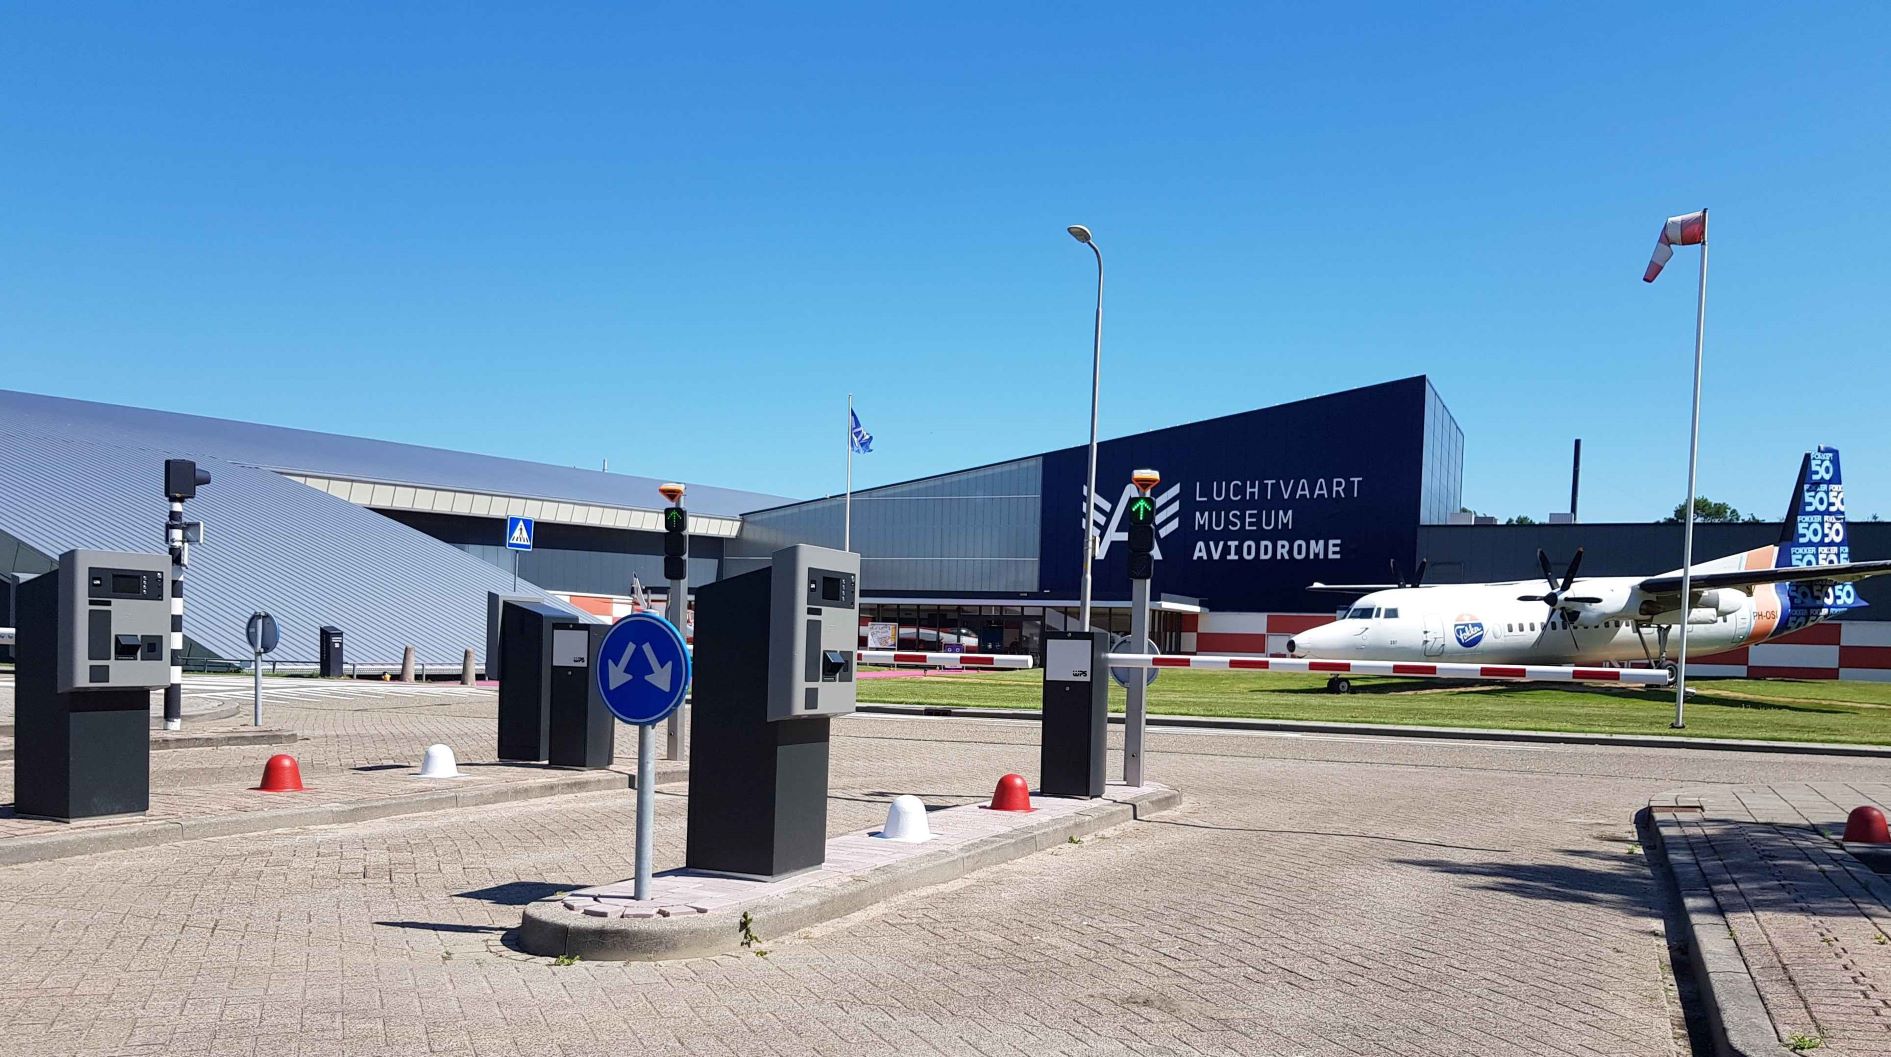 License plate recognition and cashless payment terminals reduce touch at Lelystad Airport